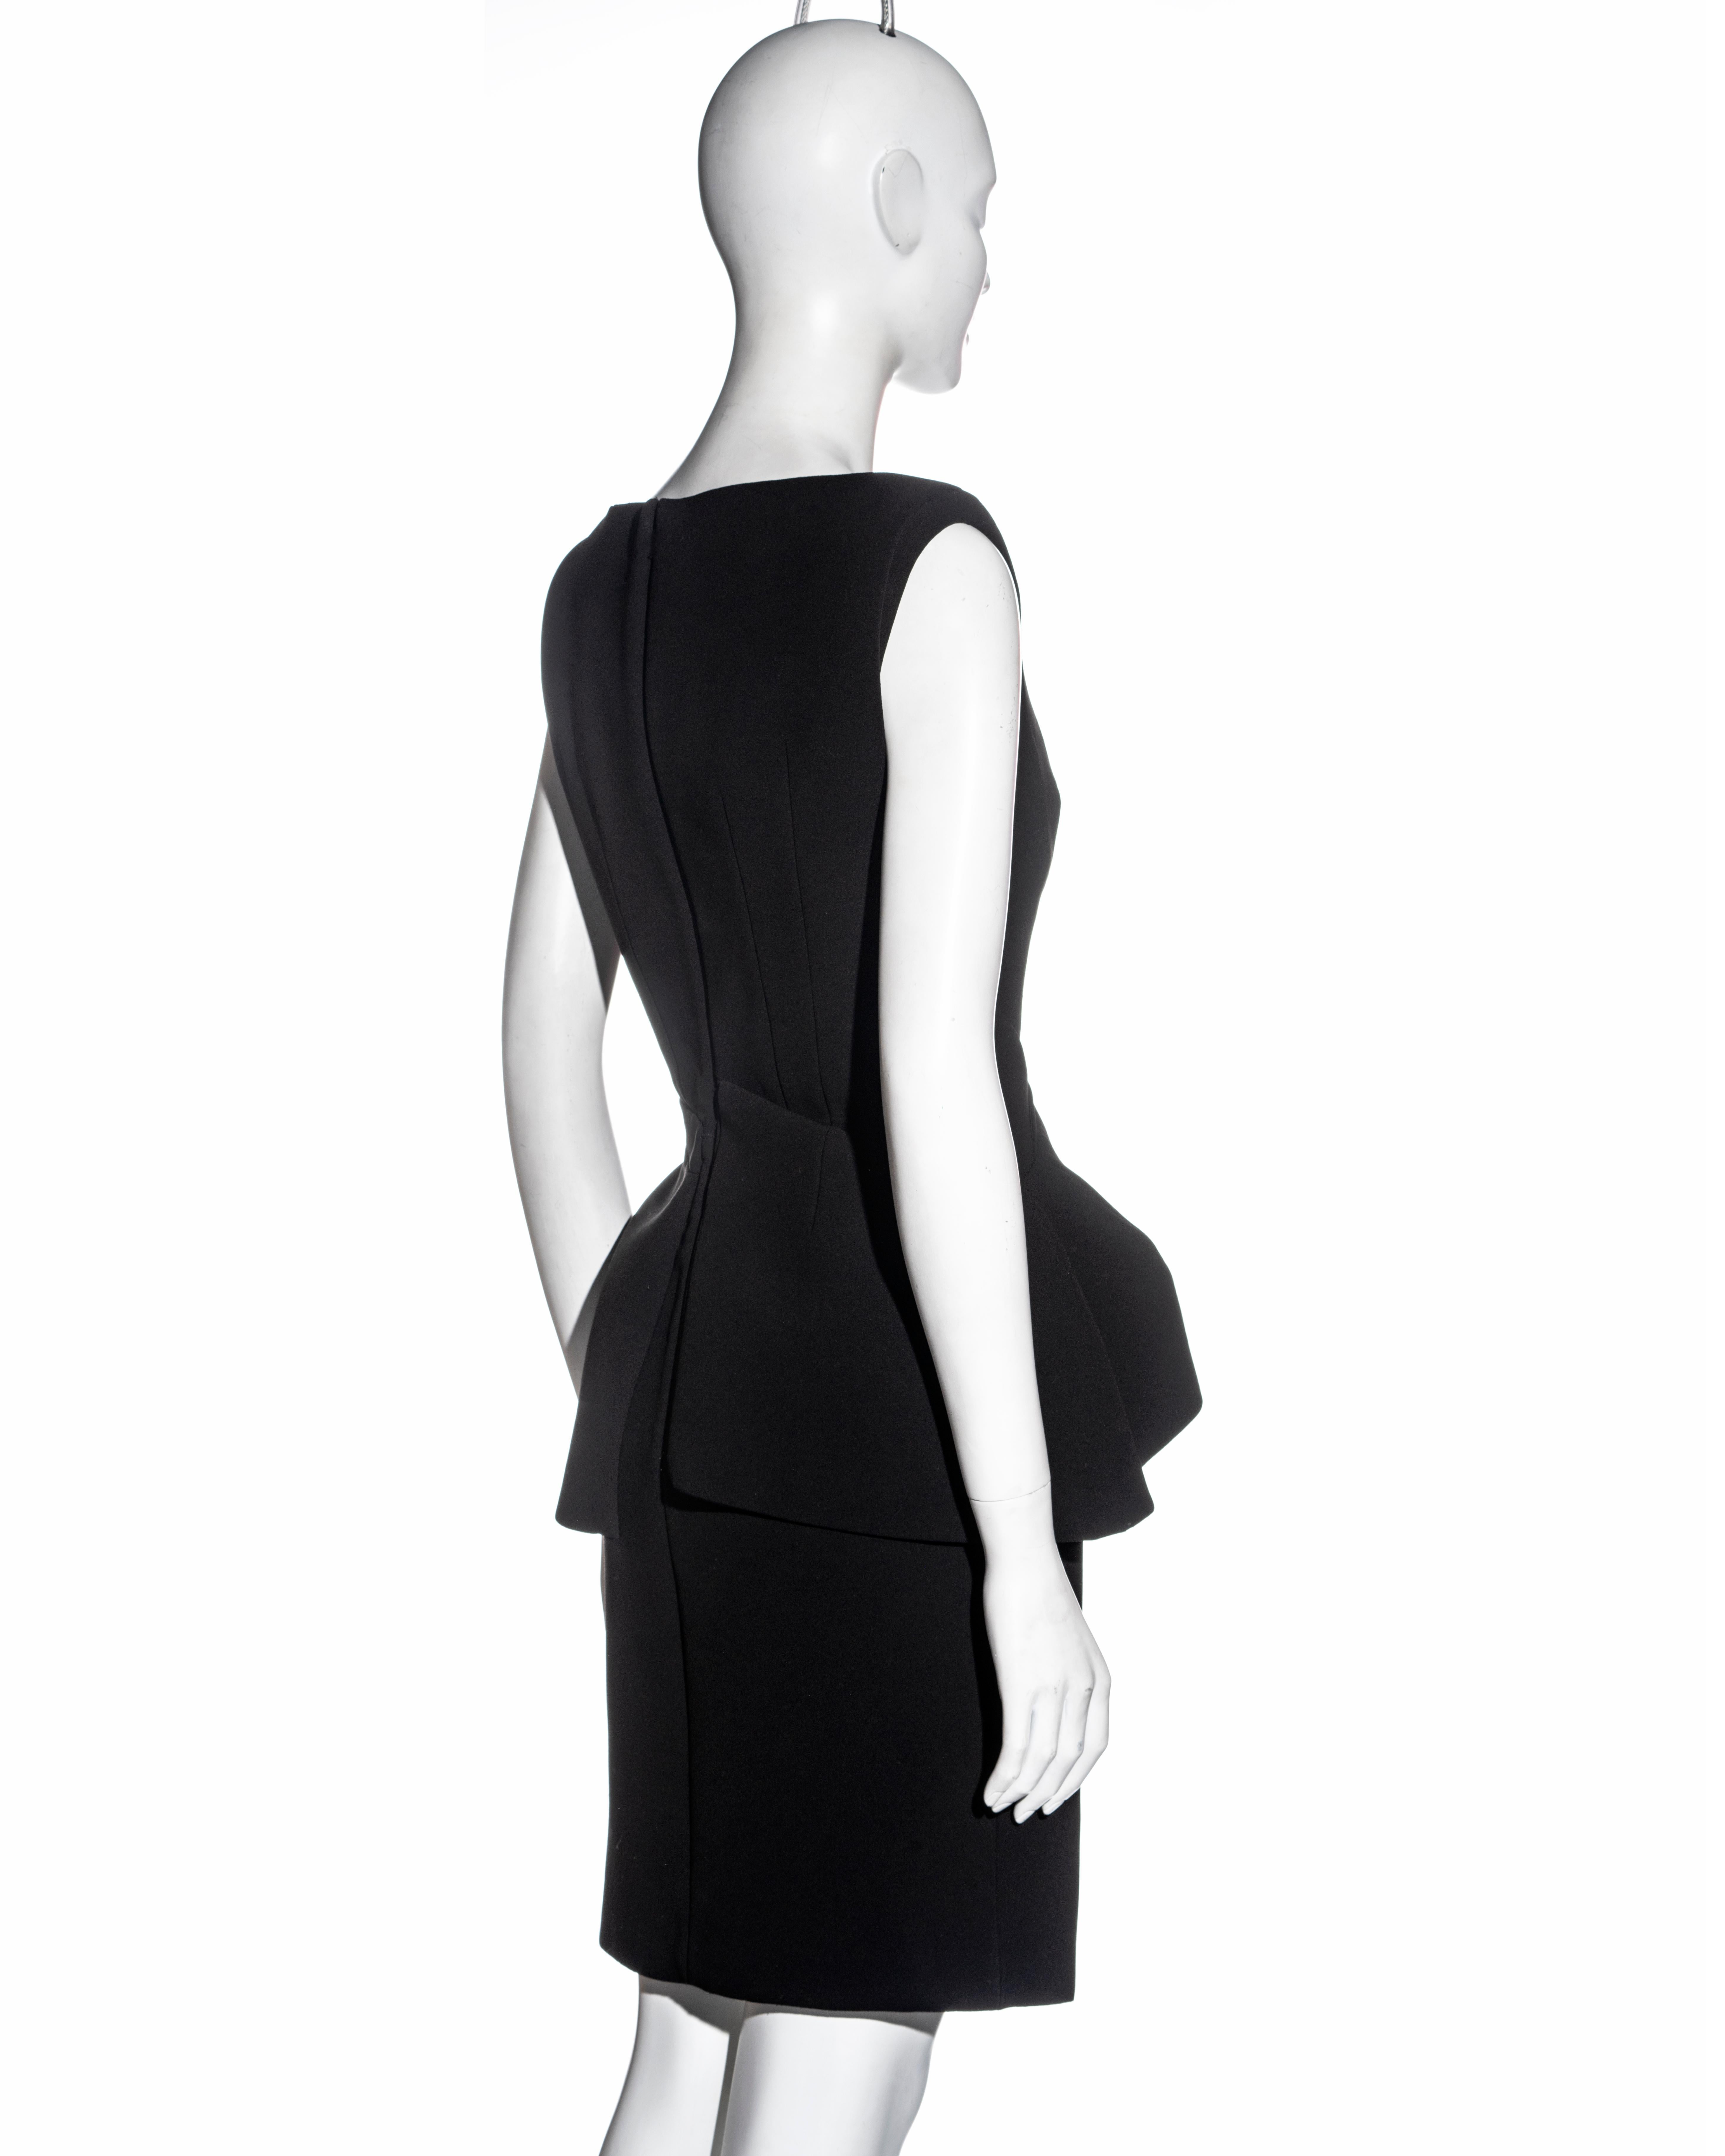 Balenciaga by Nicolas Ghesquière black structured cocktail dress, fw 2008 In Excellent Condition For Sale In London, GB